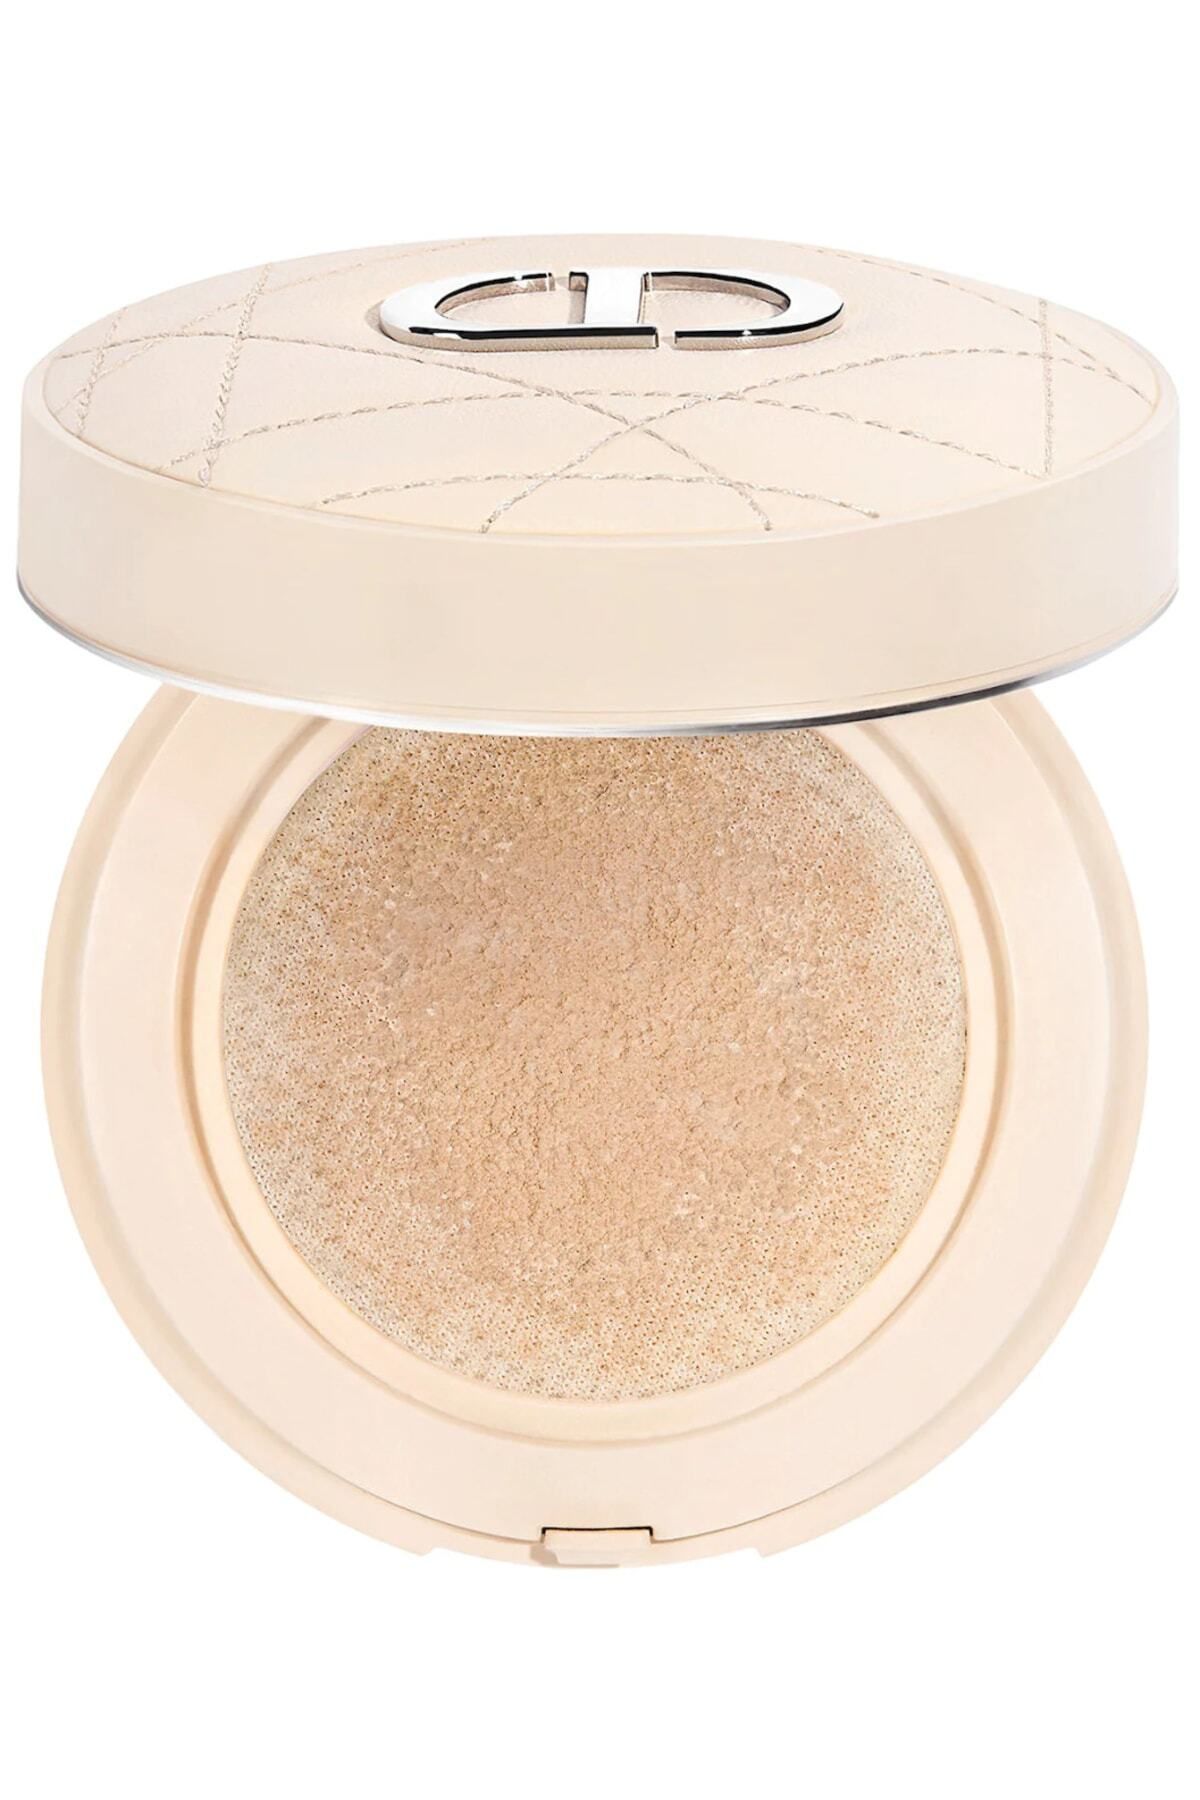 Dior 020 Light Forever Loose Cushion Powder for an Even, Matte and Naturally Skin SHİNEE190